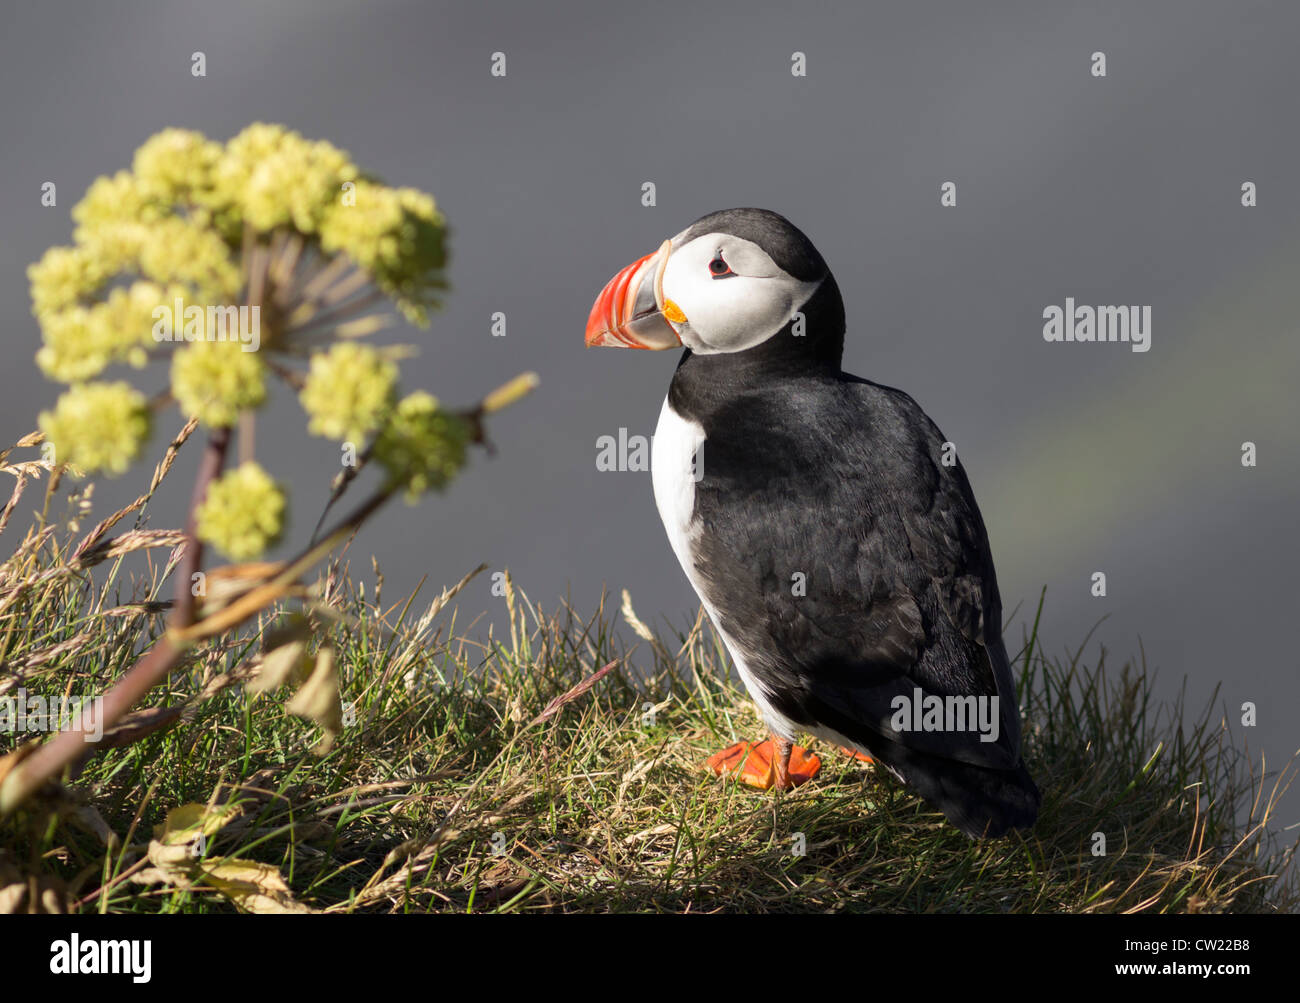 Puffin at Dyrholaey cliffs Iceland Stock Photo